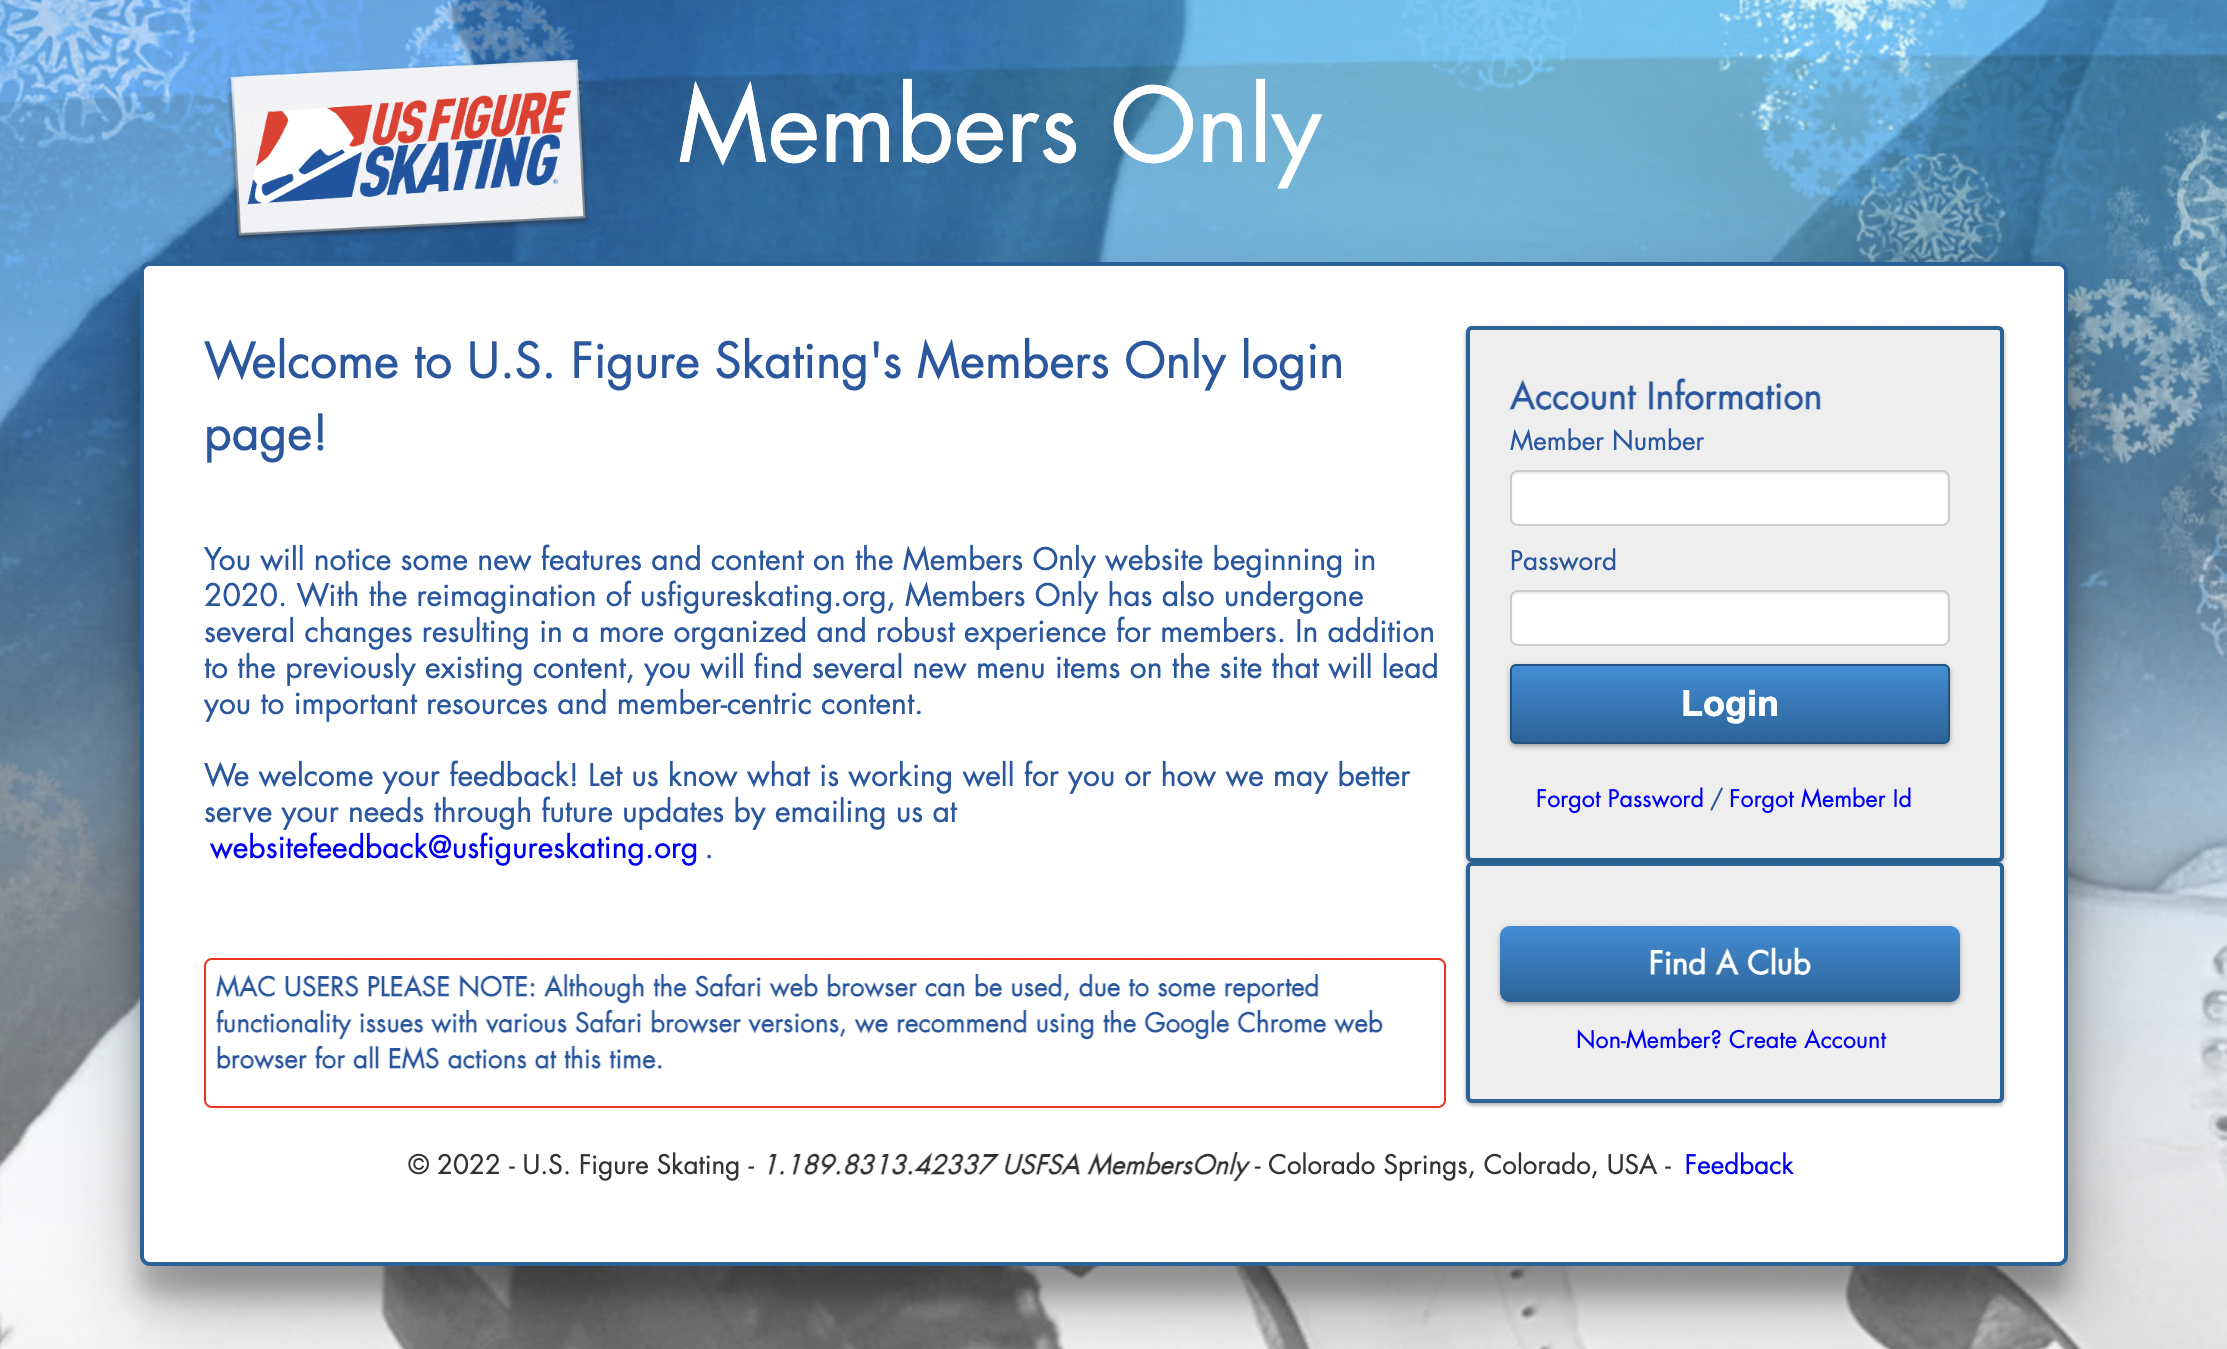 usfsa members only